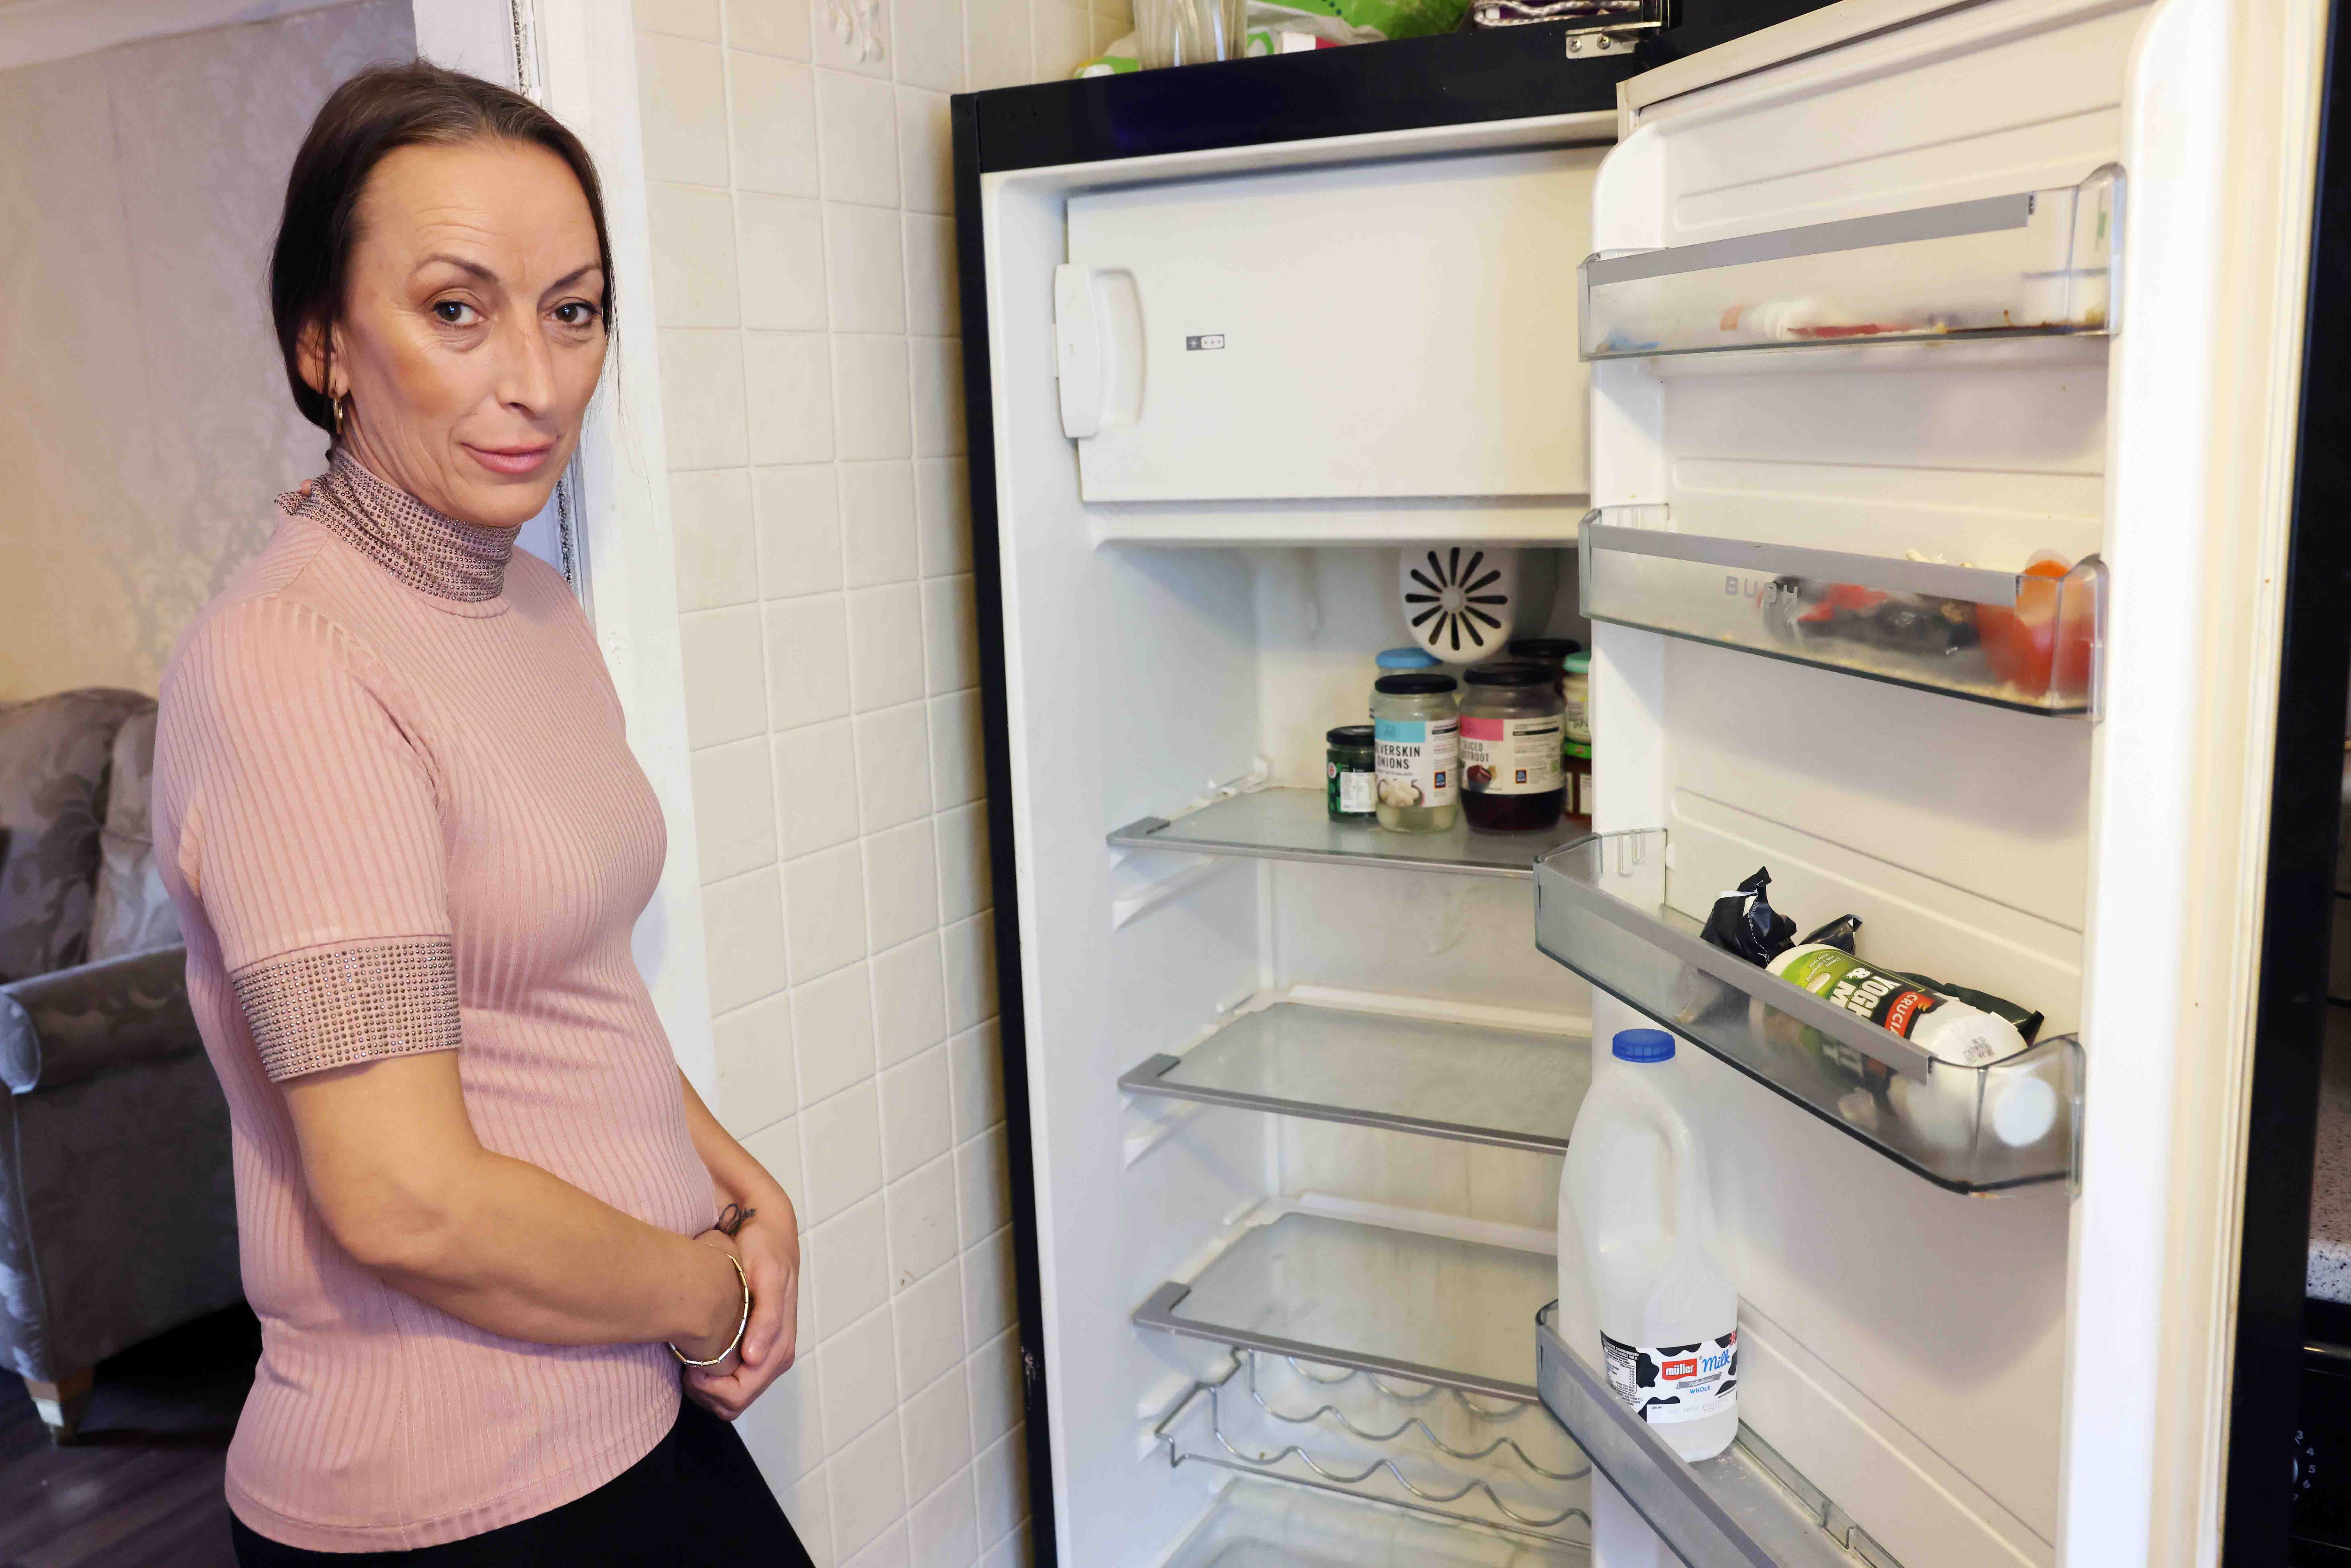 Maria Sholder, 48, says she has been unable to feed her grandkids after the Asda delivery mix up